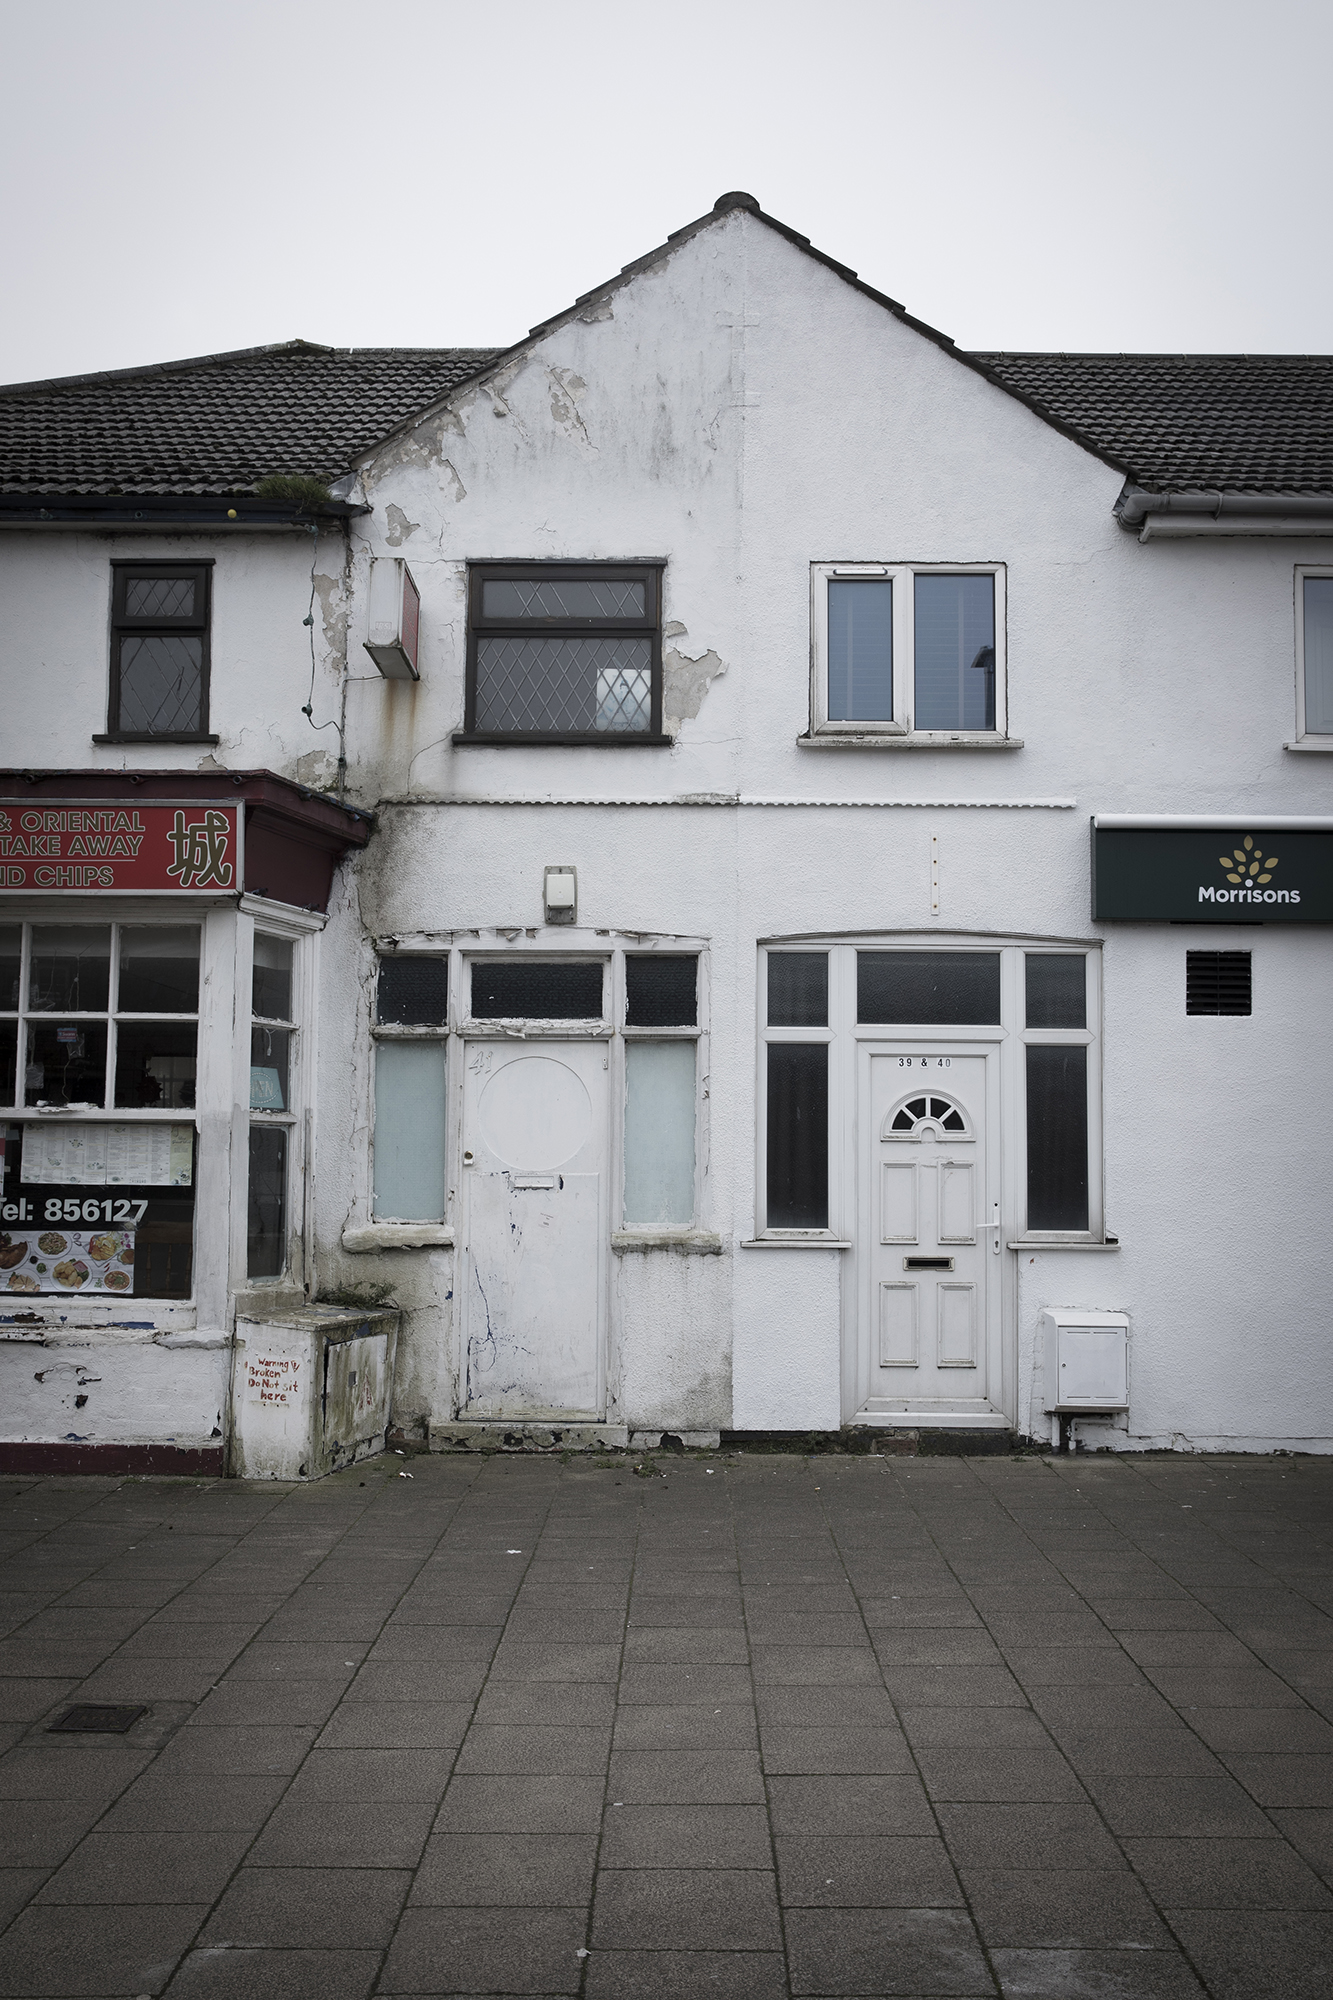 BA (Hons) Documentary Photography work by Mya Fairweather. Location of Missing Person Case